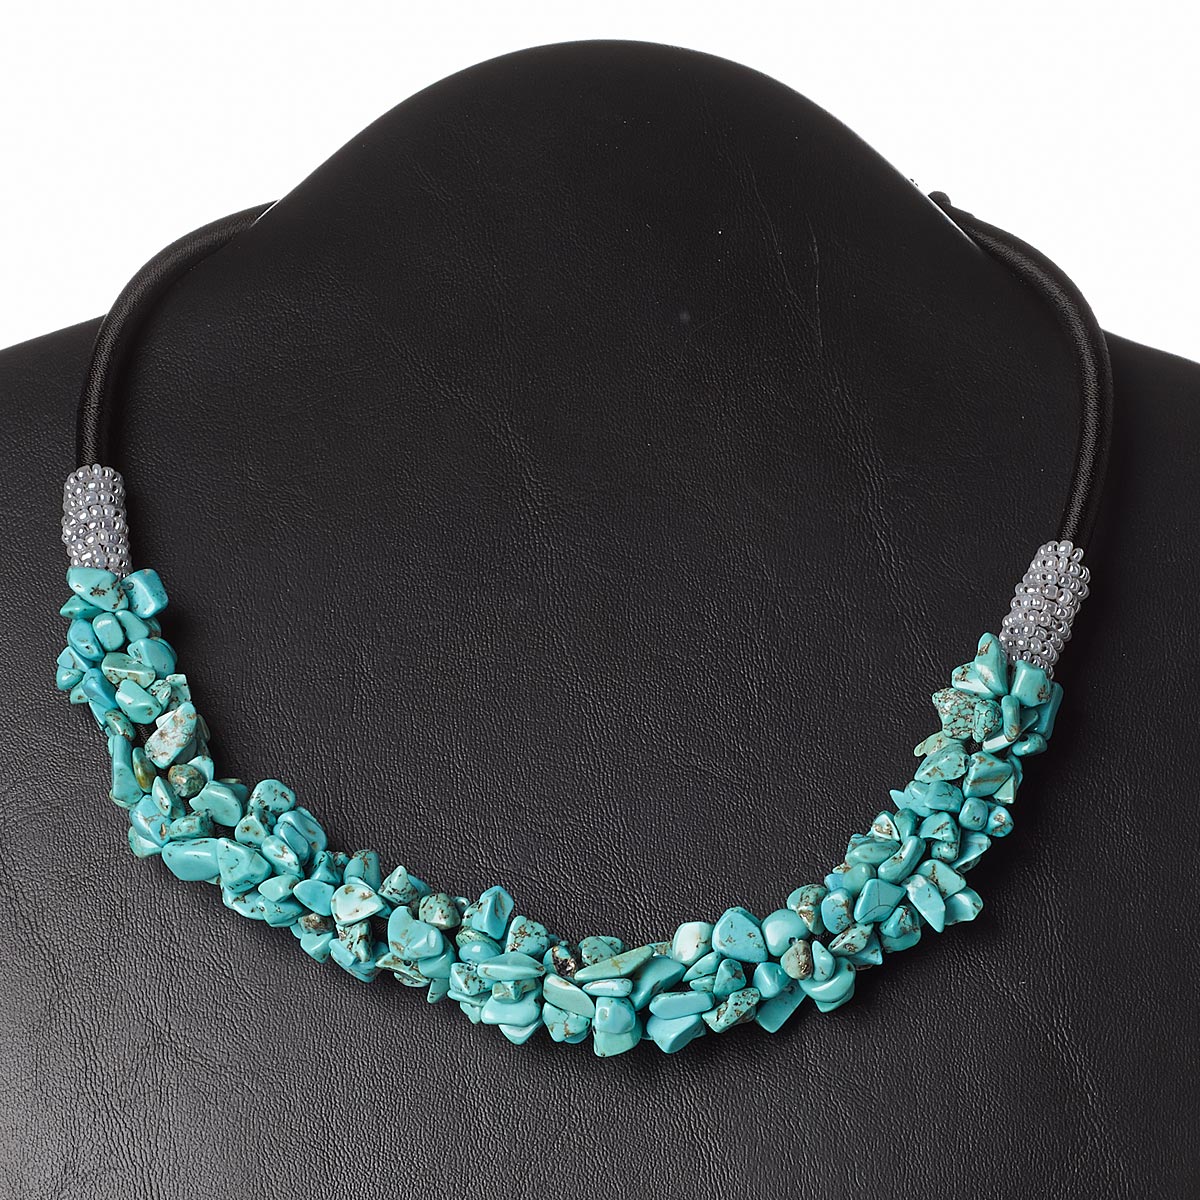 Necklace, magnesite (dyed / stabilized) / nylon cord / glass / plastic ...